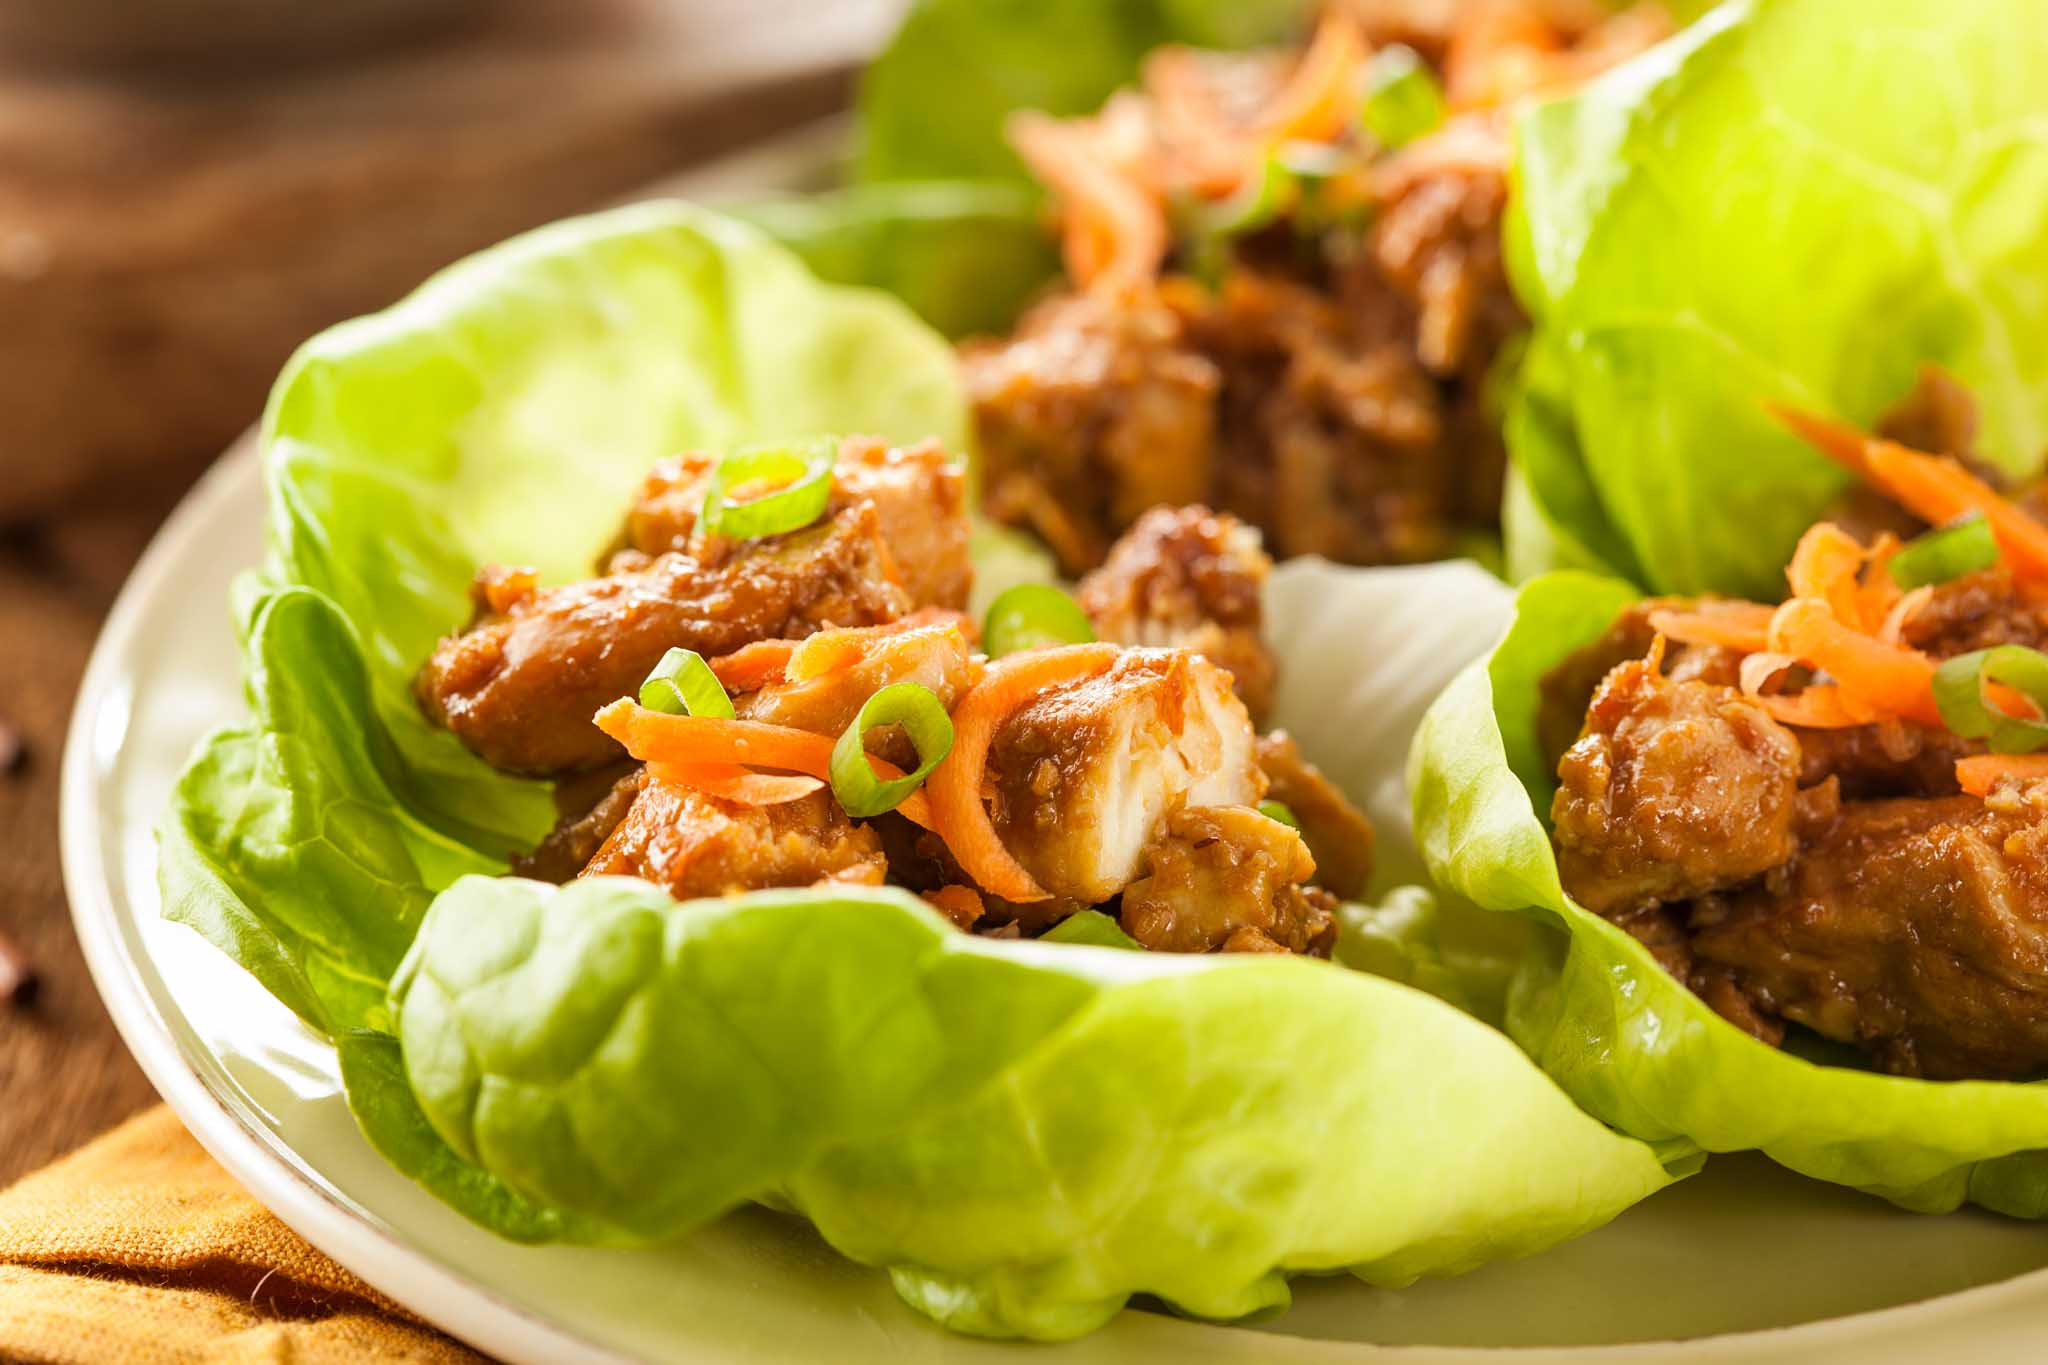 The Real Food Academy Miami lettuce wraps with chicken and rice.